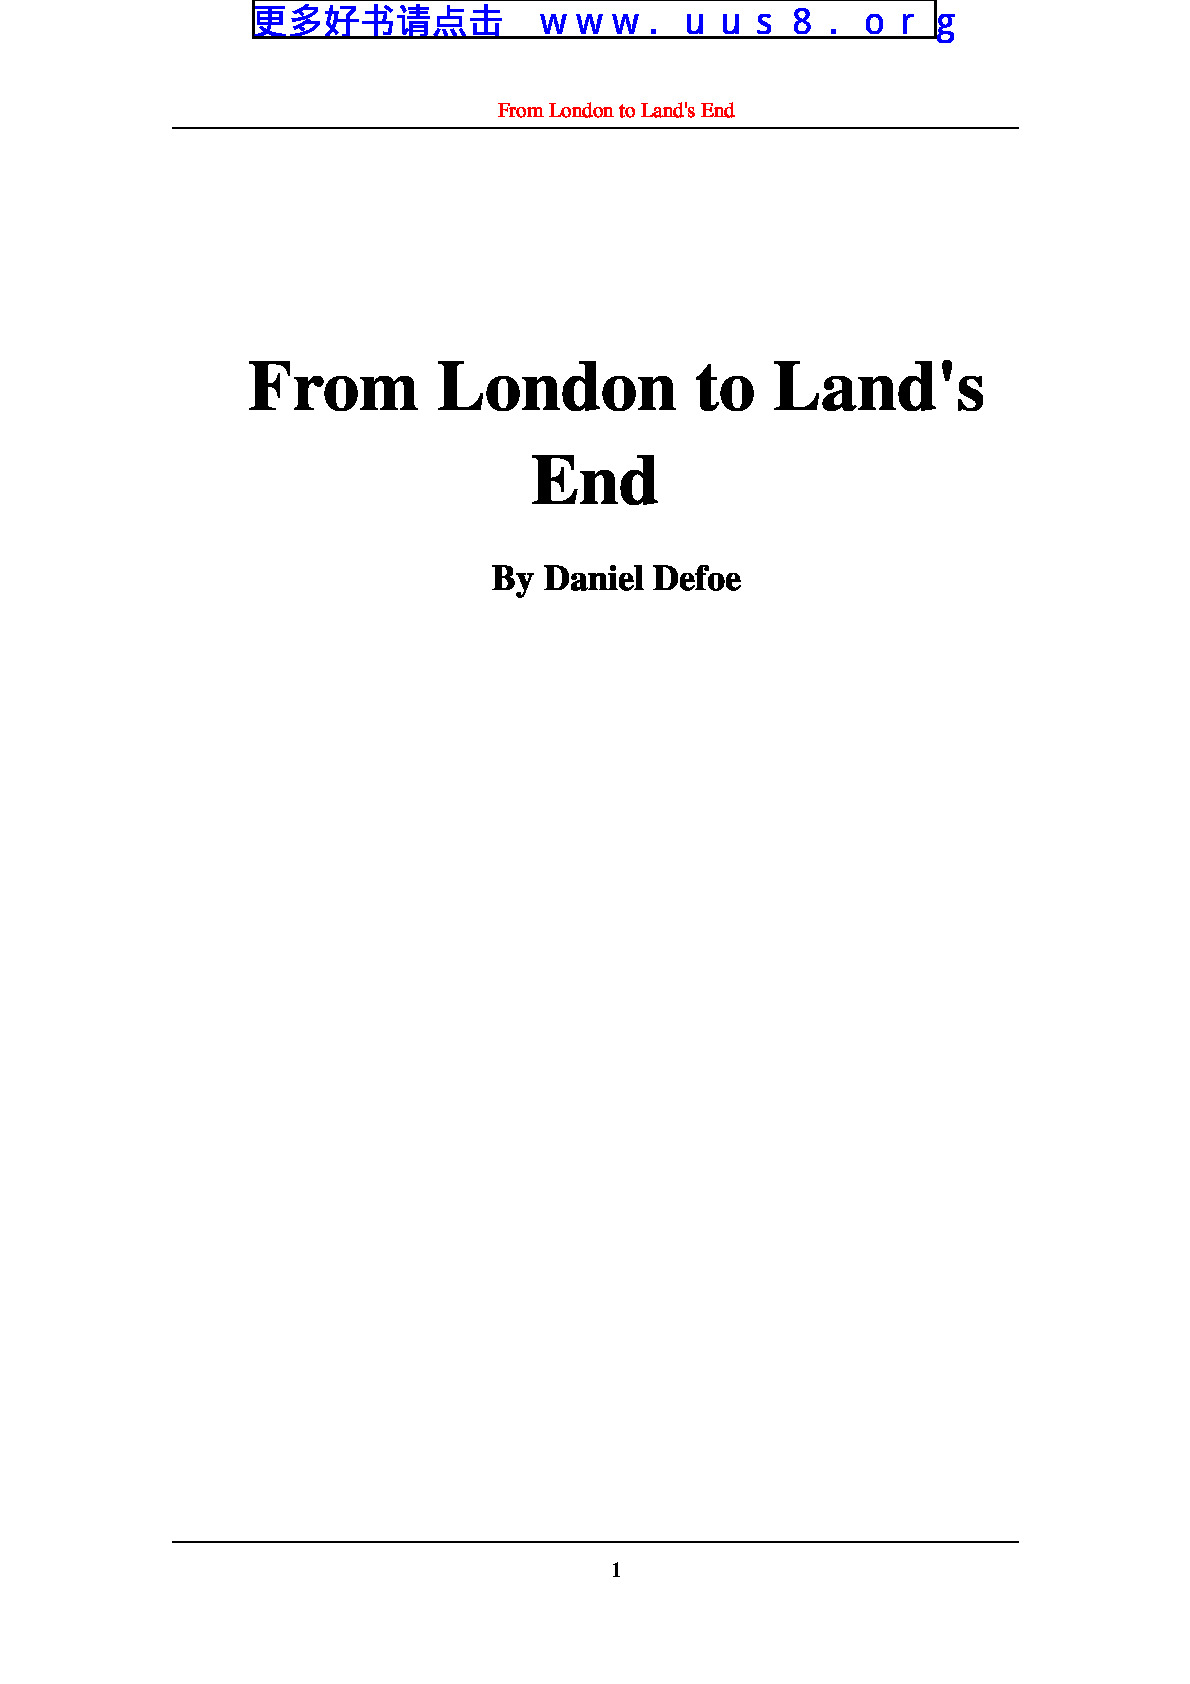 From_London_to_Land’s_End(从伦敦到尽头)